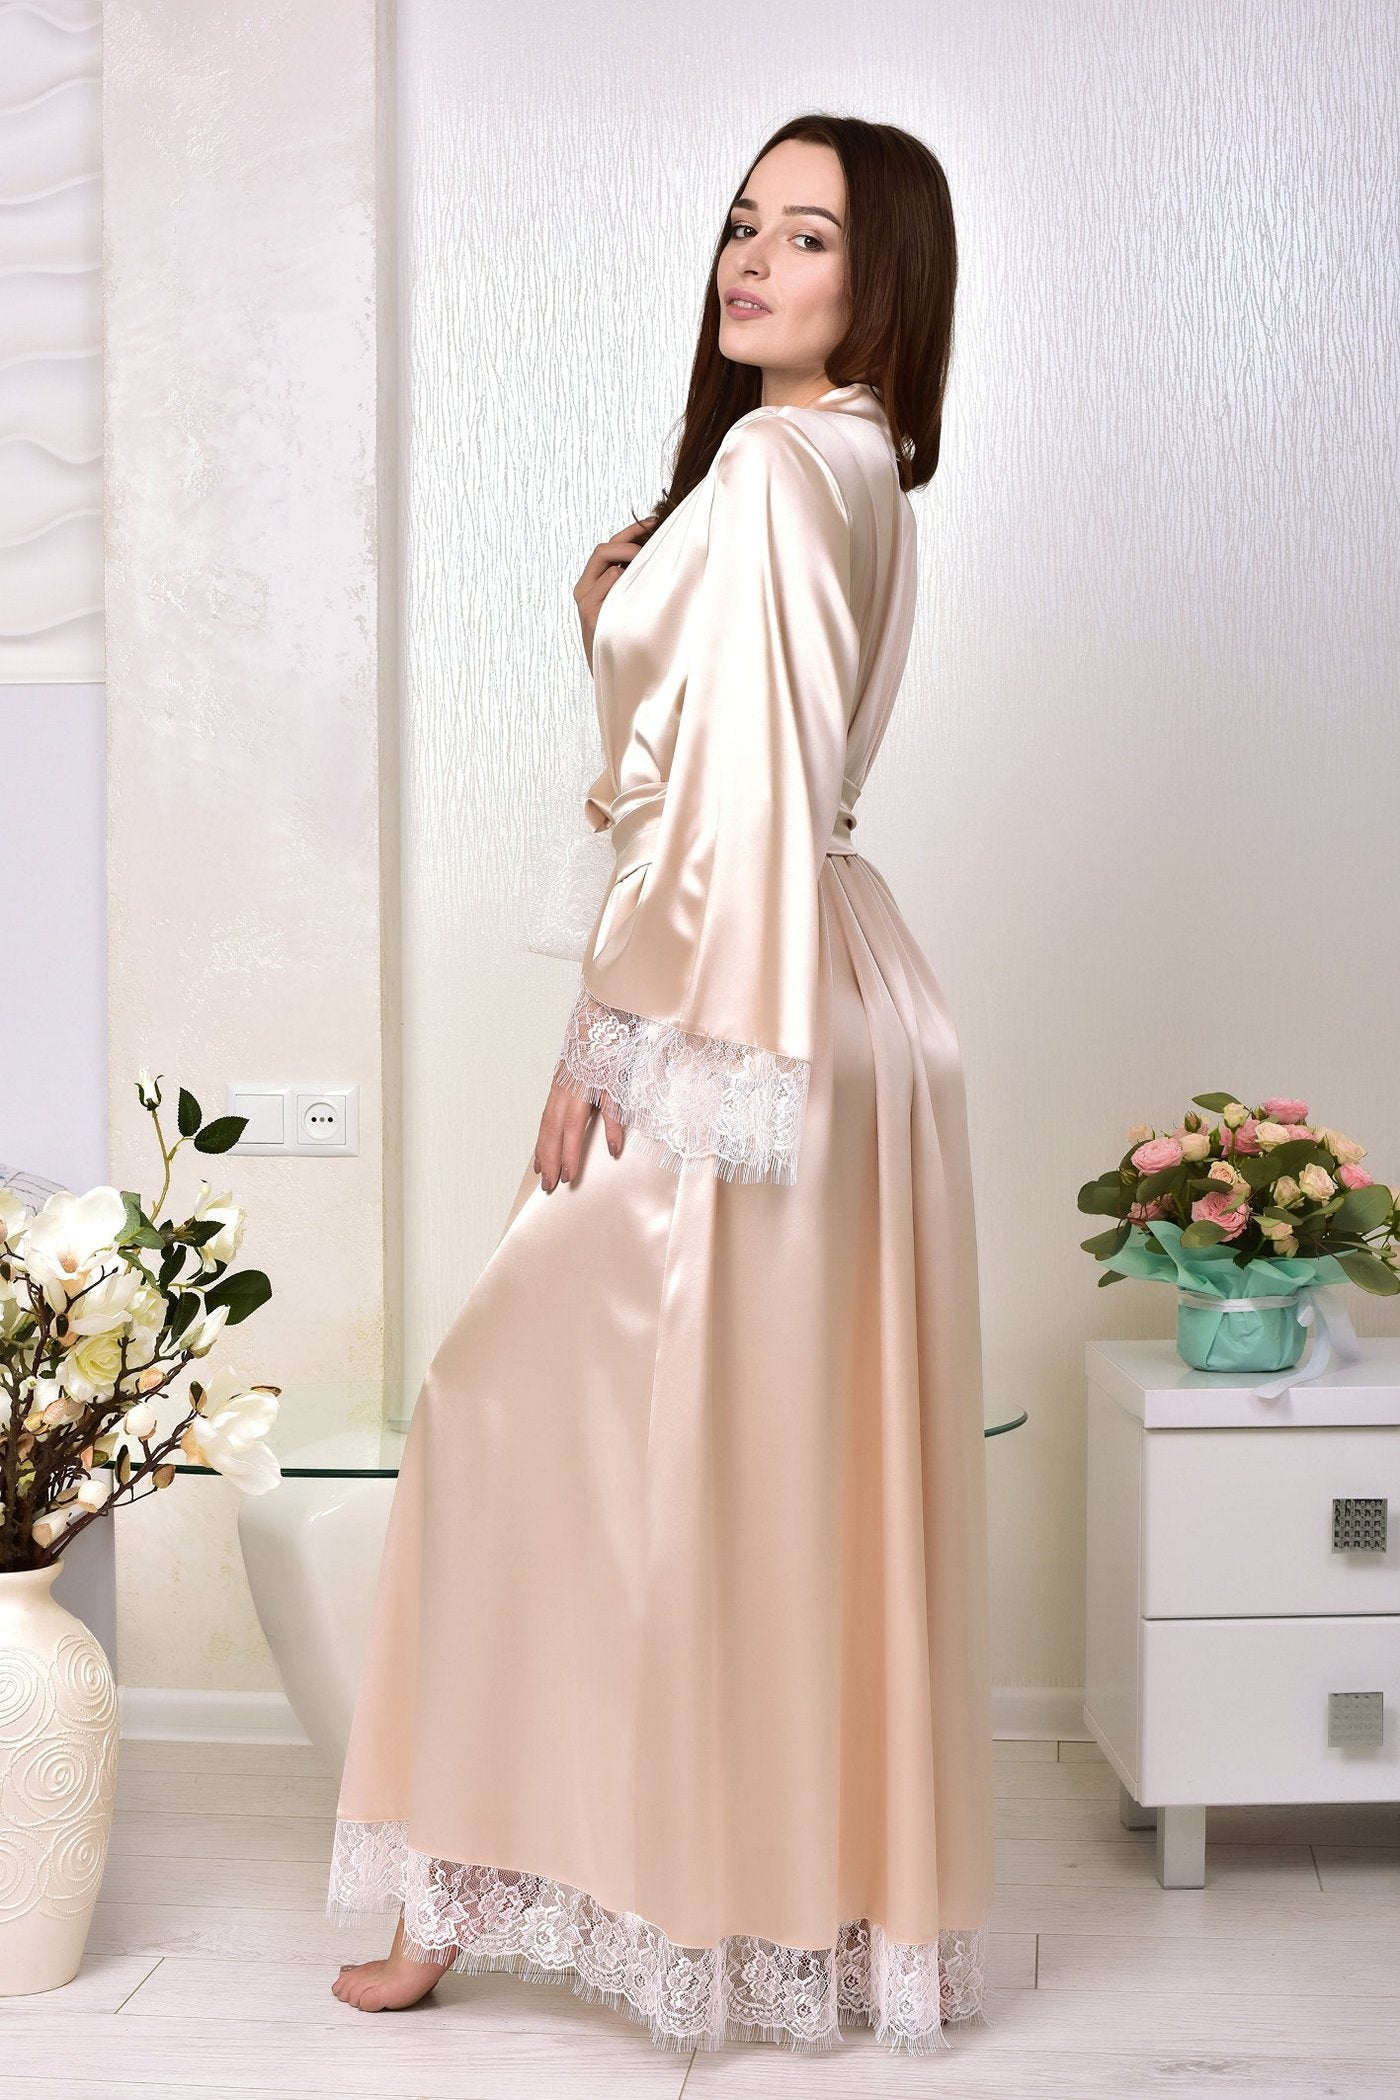 Bridal robe in a serene beige hue, featuring exquisite lace accents for a touch of timeless elegance